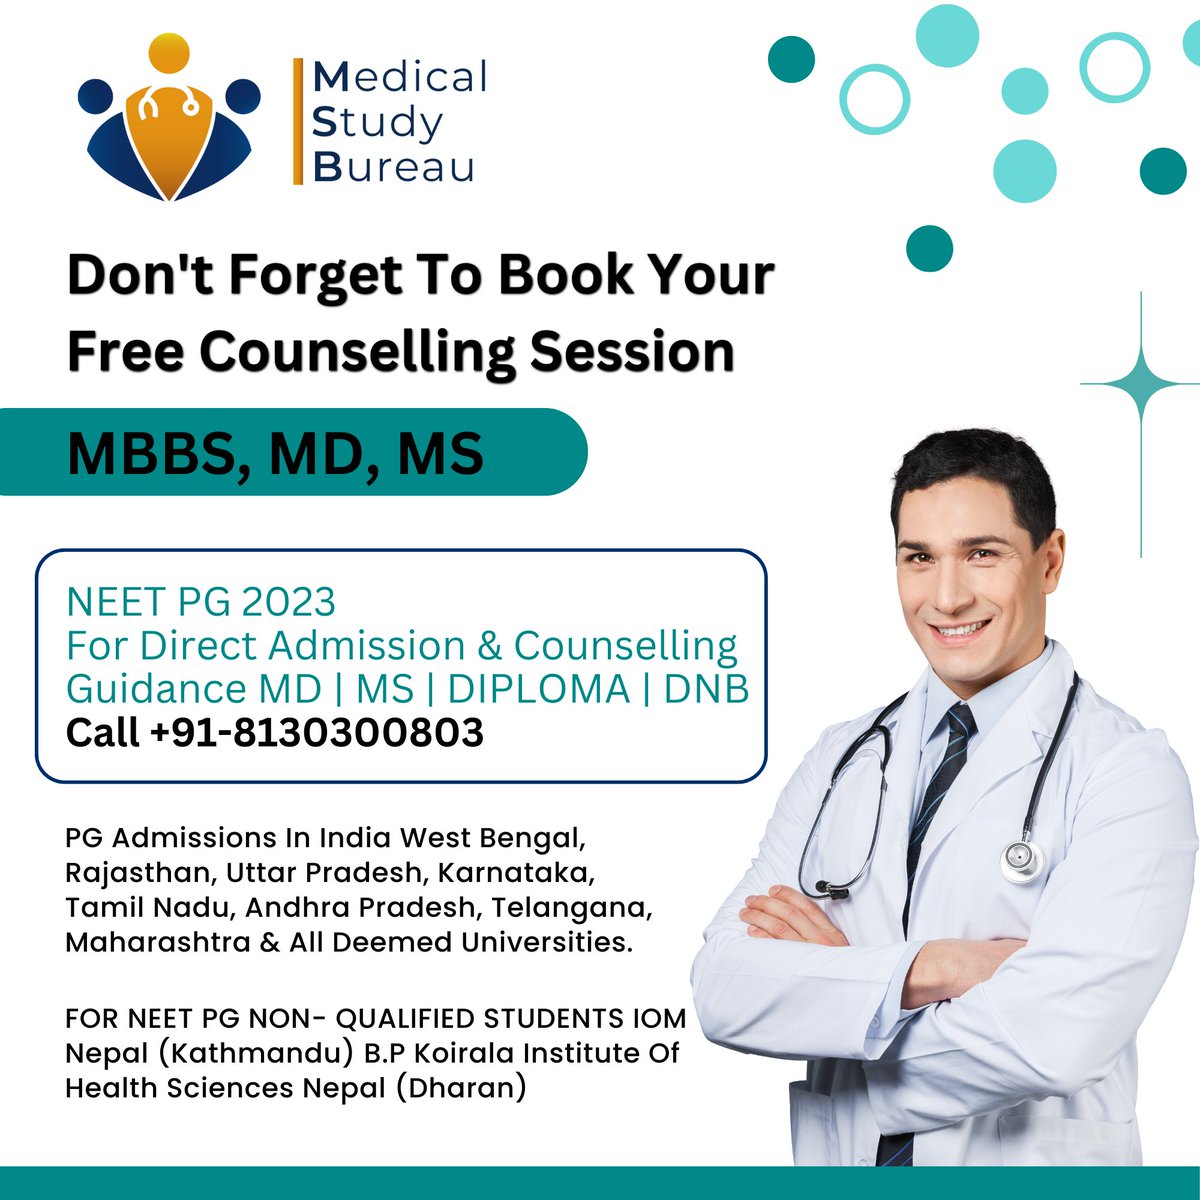 Don't Forget To Book Your Free Counselling Session
MBBS, MD, MS
NEET PG 2023
For Direct Admission & Counselling Guidance MD | MS | DIPLOMA | DNB
Contact Us
📞 +91 8130300825
Mail Us
📧 Info@medicalstudyburea.co.in
#FreeCounsellingSession
#MBBS
#MD
#MS
#NEETPG2023
#DirectAdmission